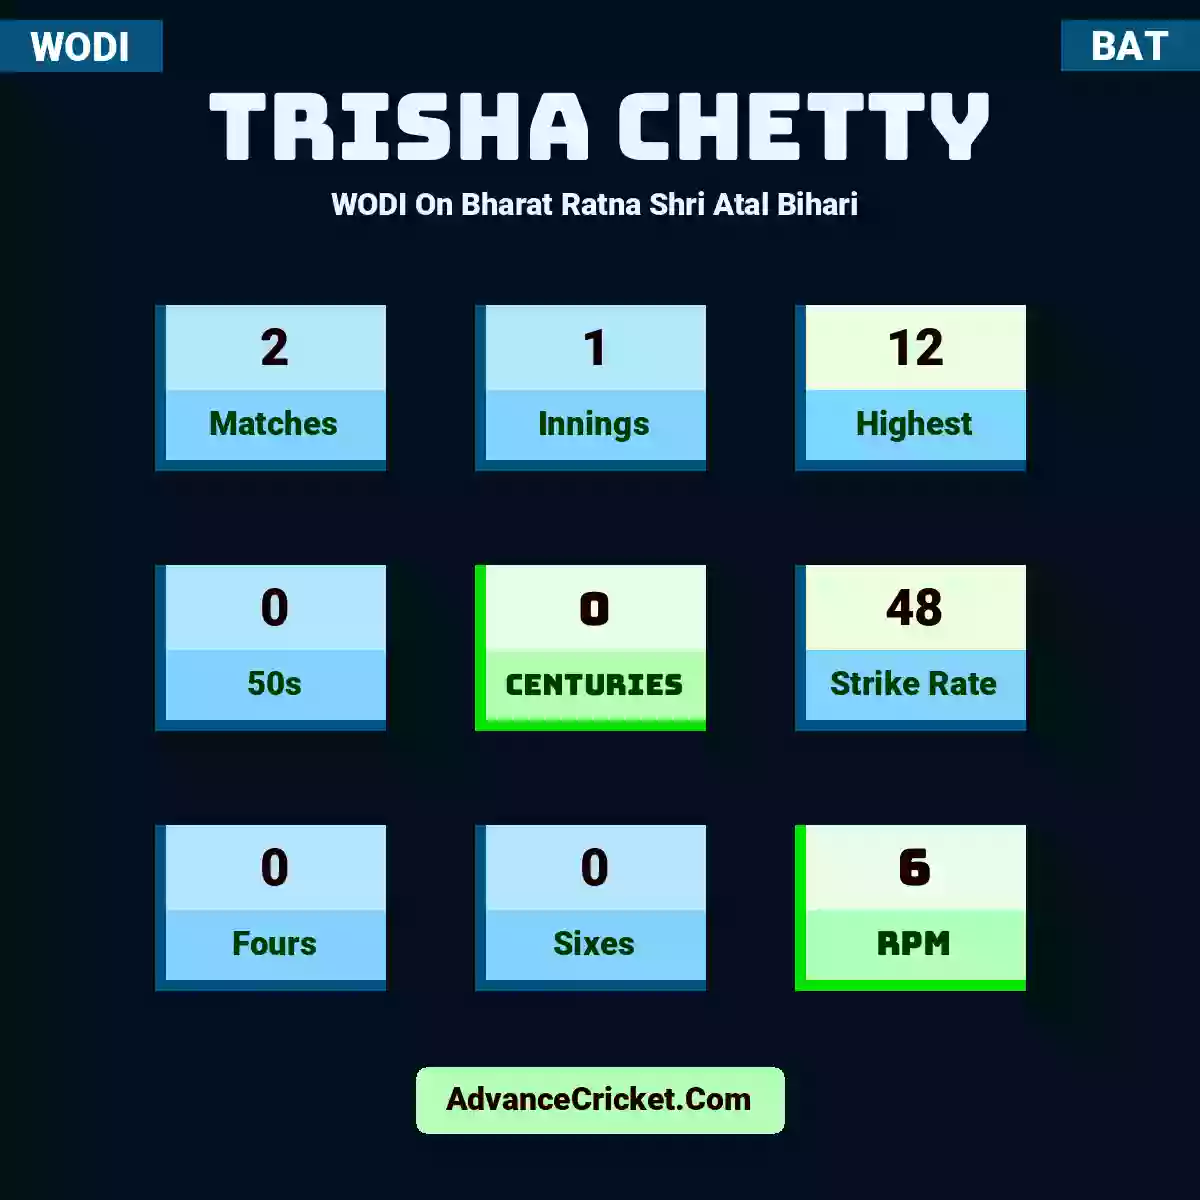 Trisha Chetty WODI  On Bharat Ratna Shri Atal Bihari , Trisha Chetty played 2 matches, scored 12 runs as highest, 0 half-centuries, and 0 centuries, with a strike rate of 48. T.Chetty hit 0 fours and 0 sixes, with an RPM of 6.